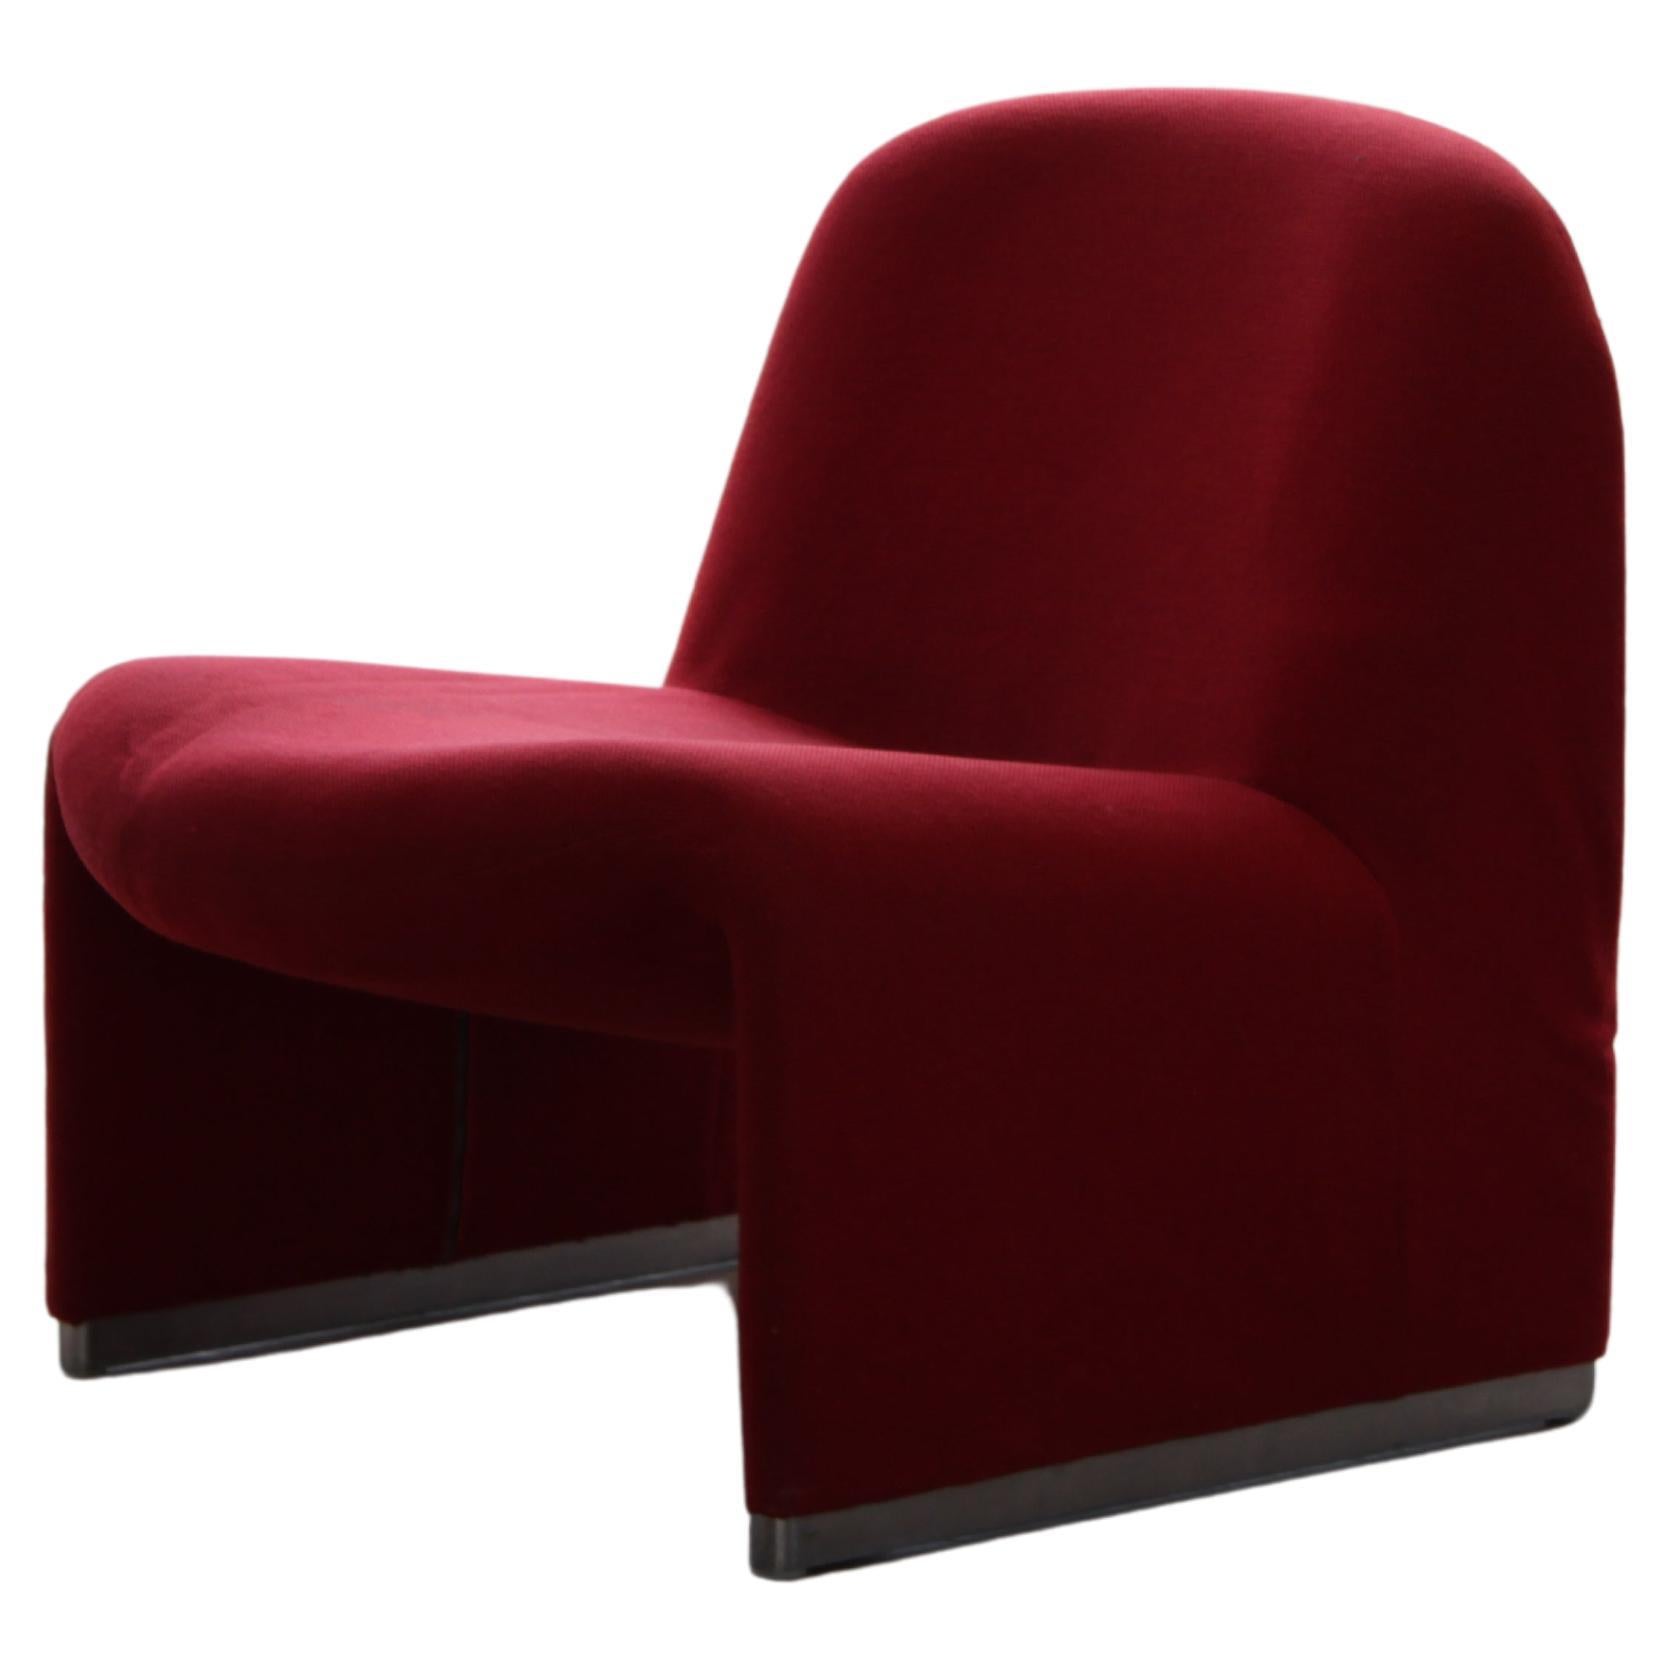 Mid 20th Century Modern Alky Lounge chair by Giancarlo Piretti for Artifort